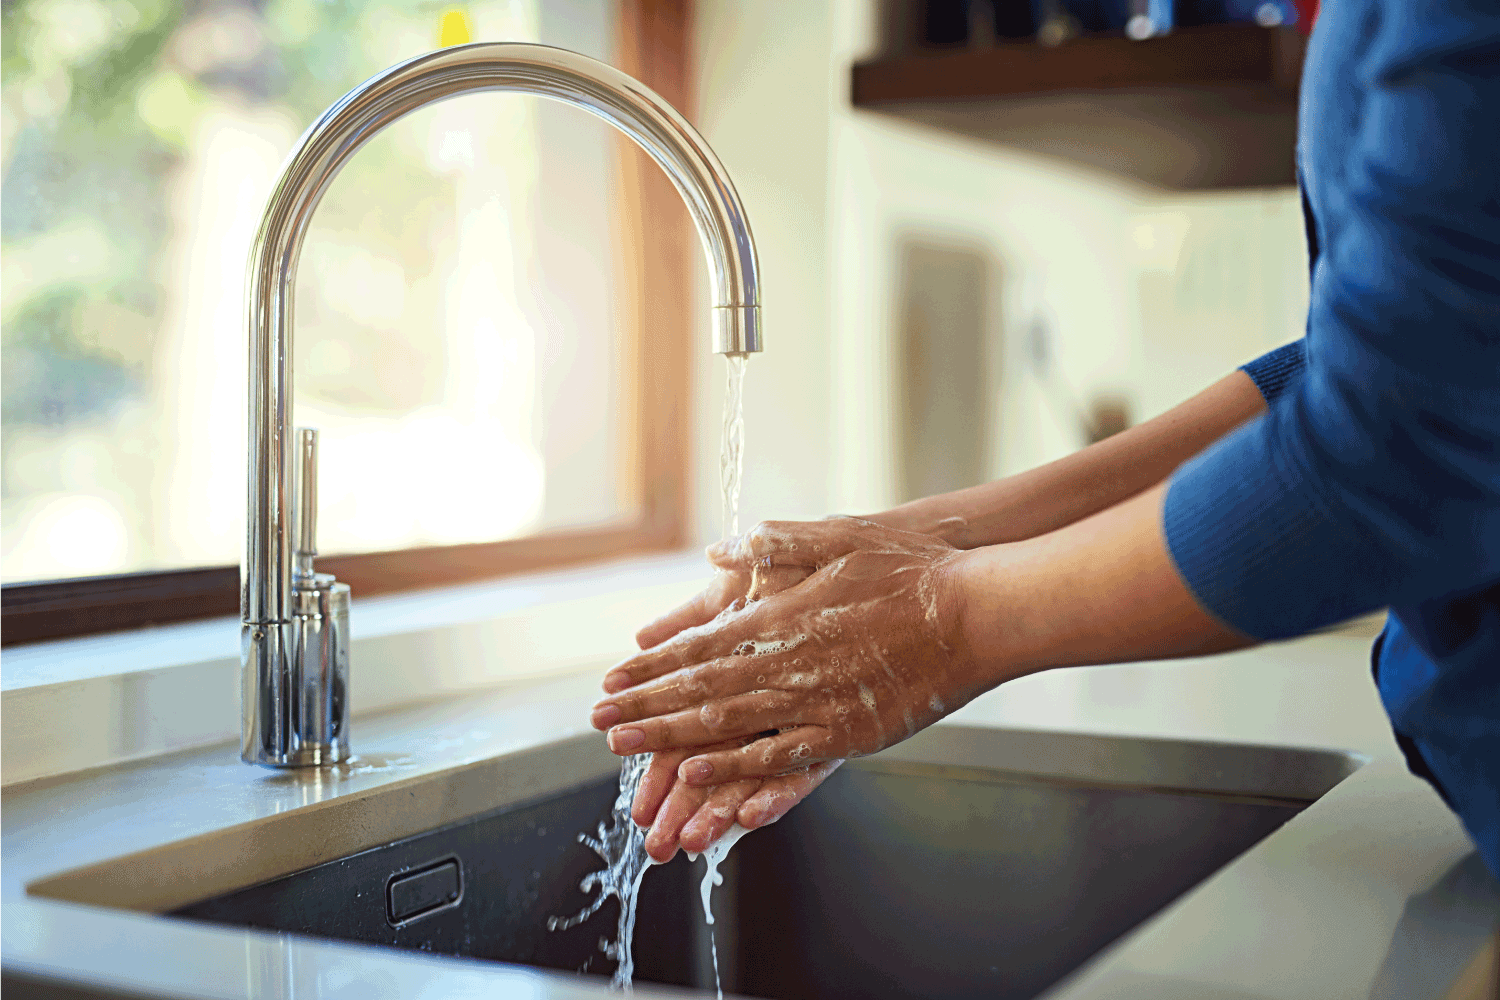  woman washing her hands in the kitchen sink